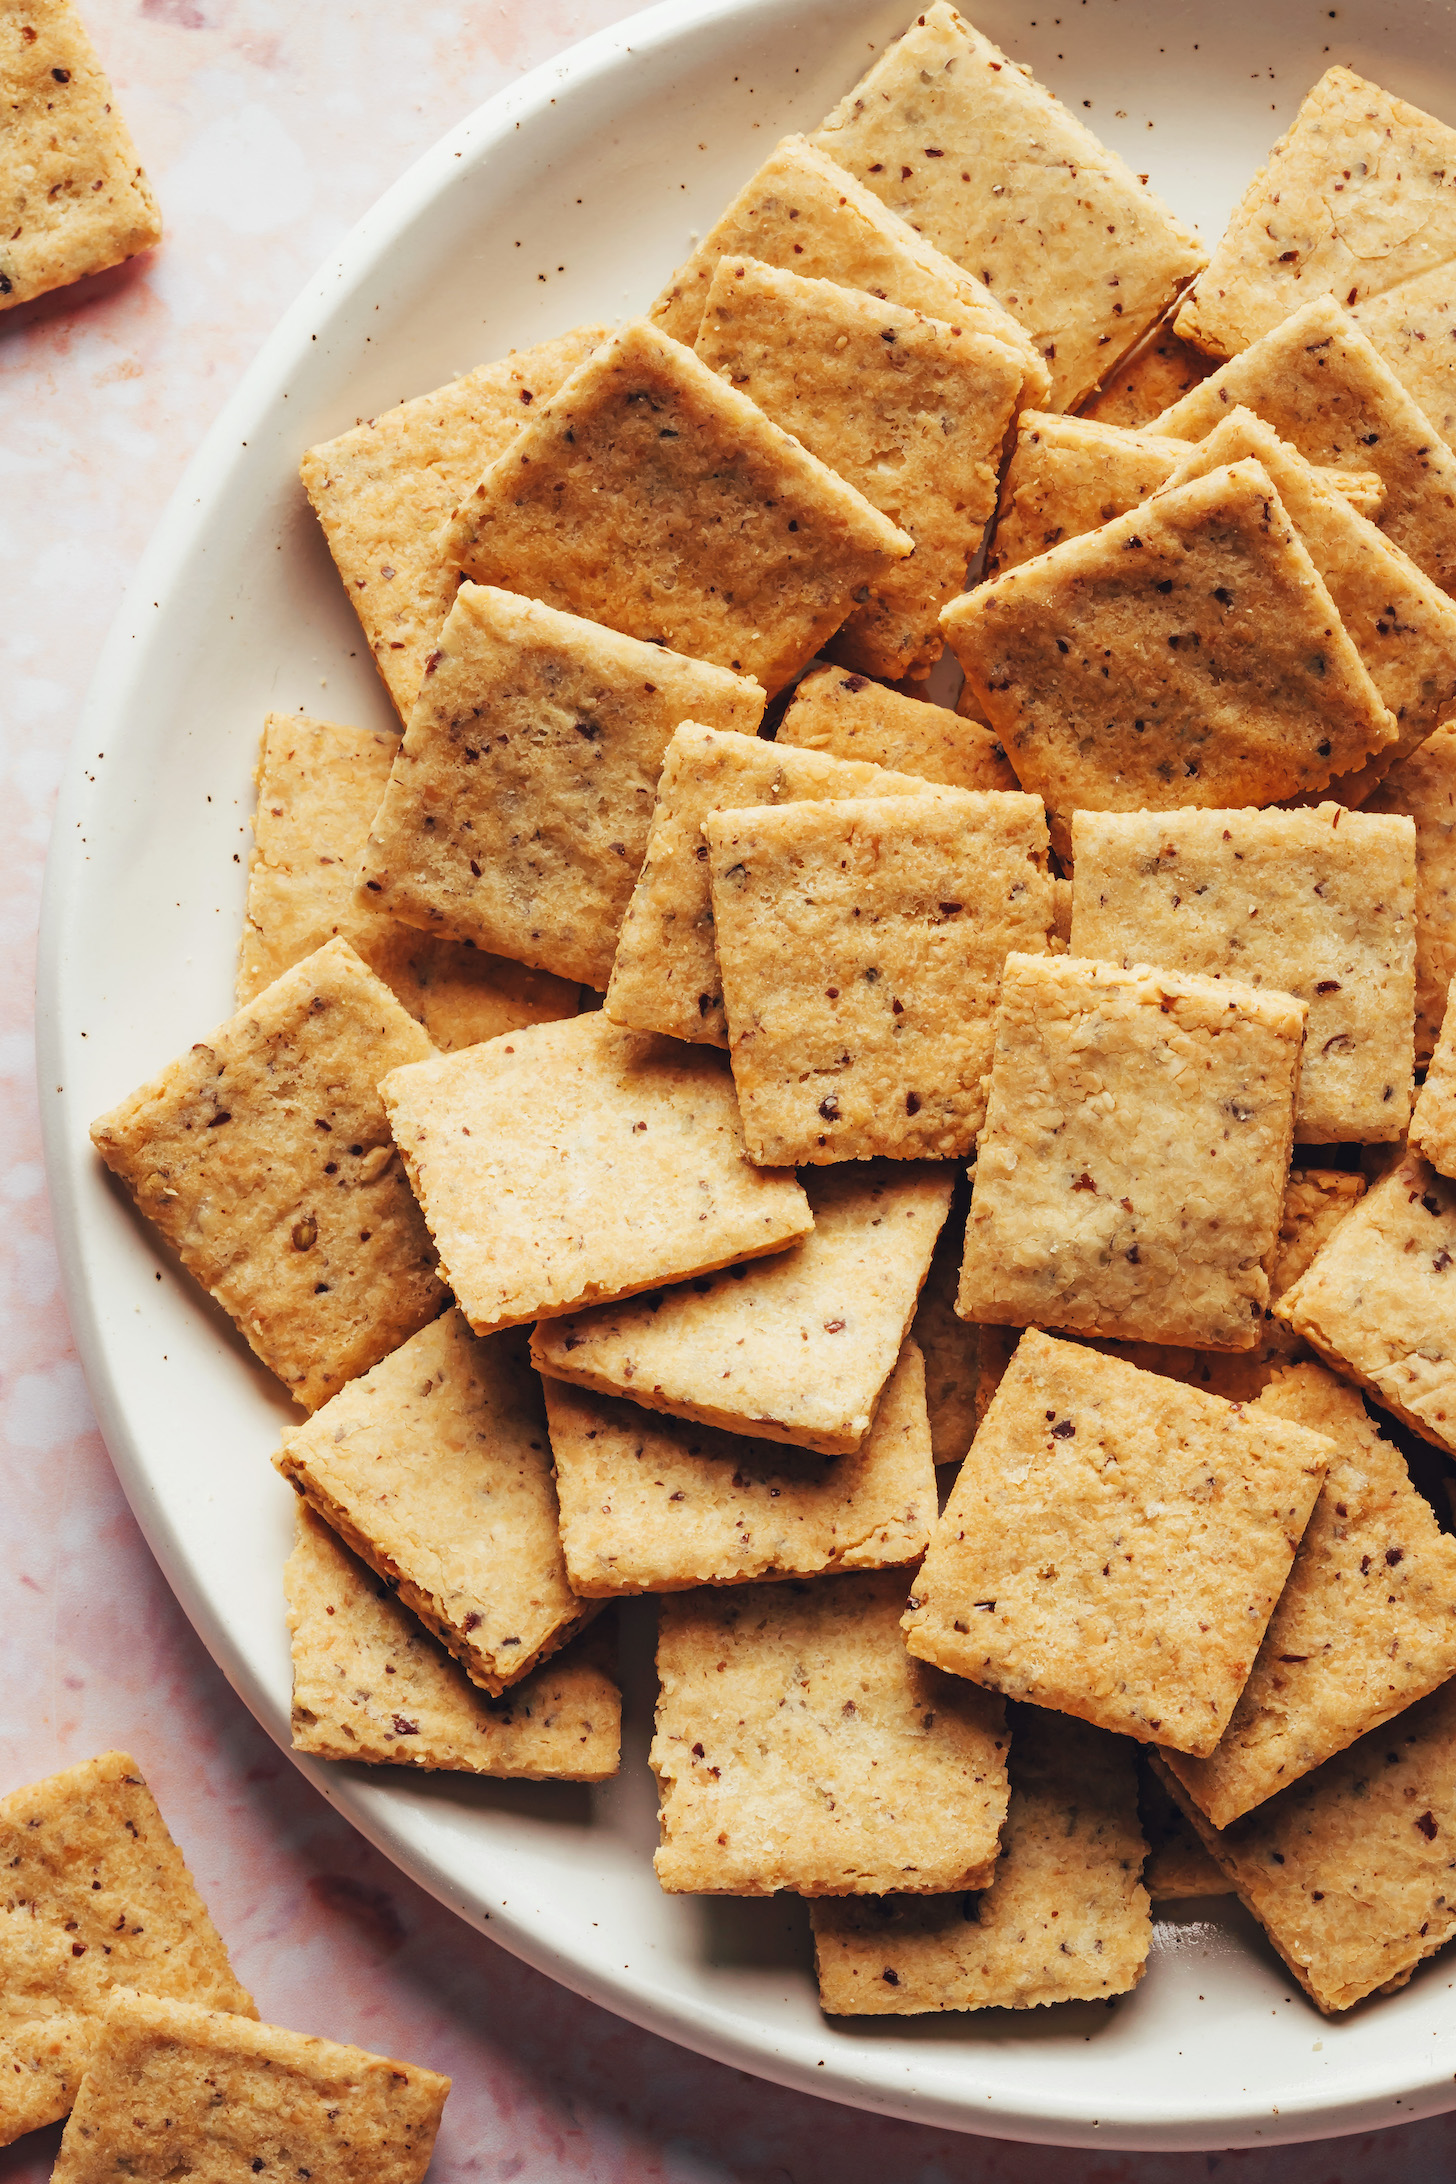 Bowl filled with homemade grain-free almond flour crackers